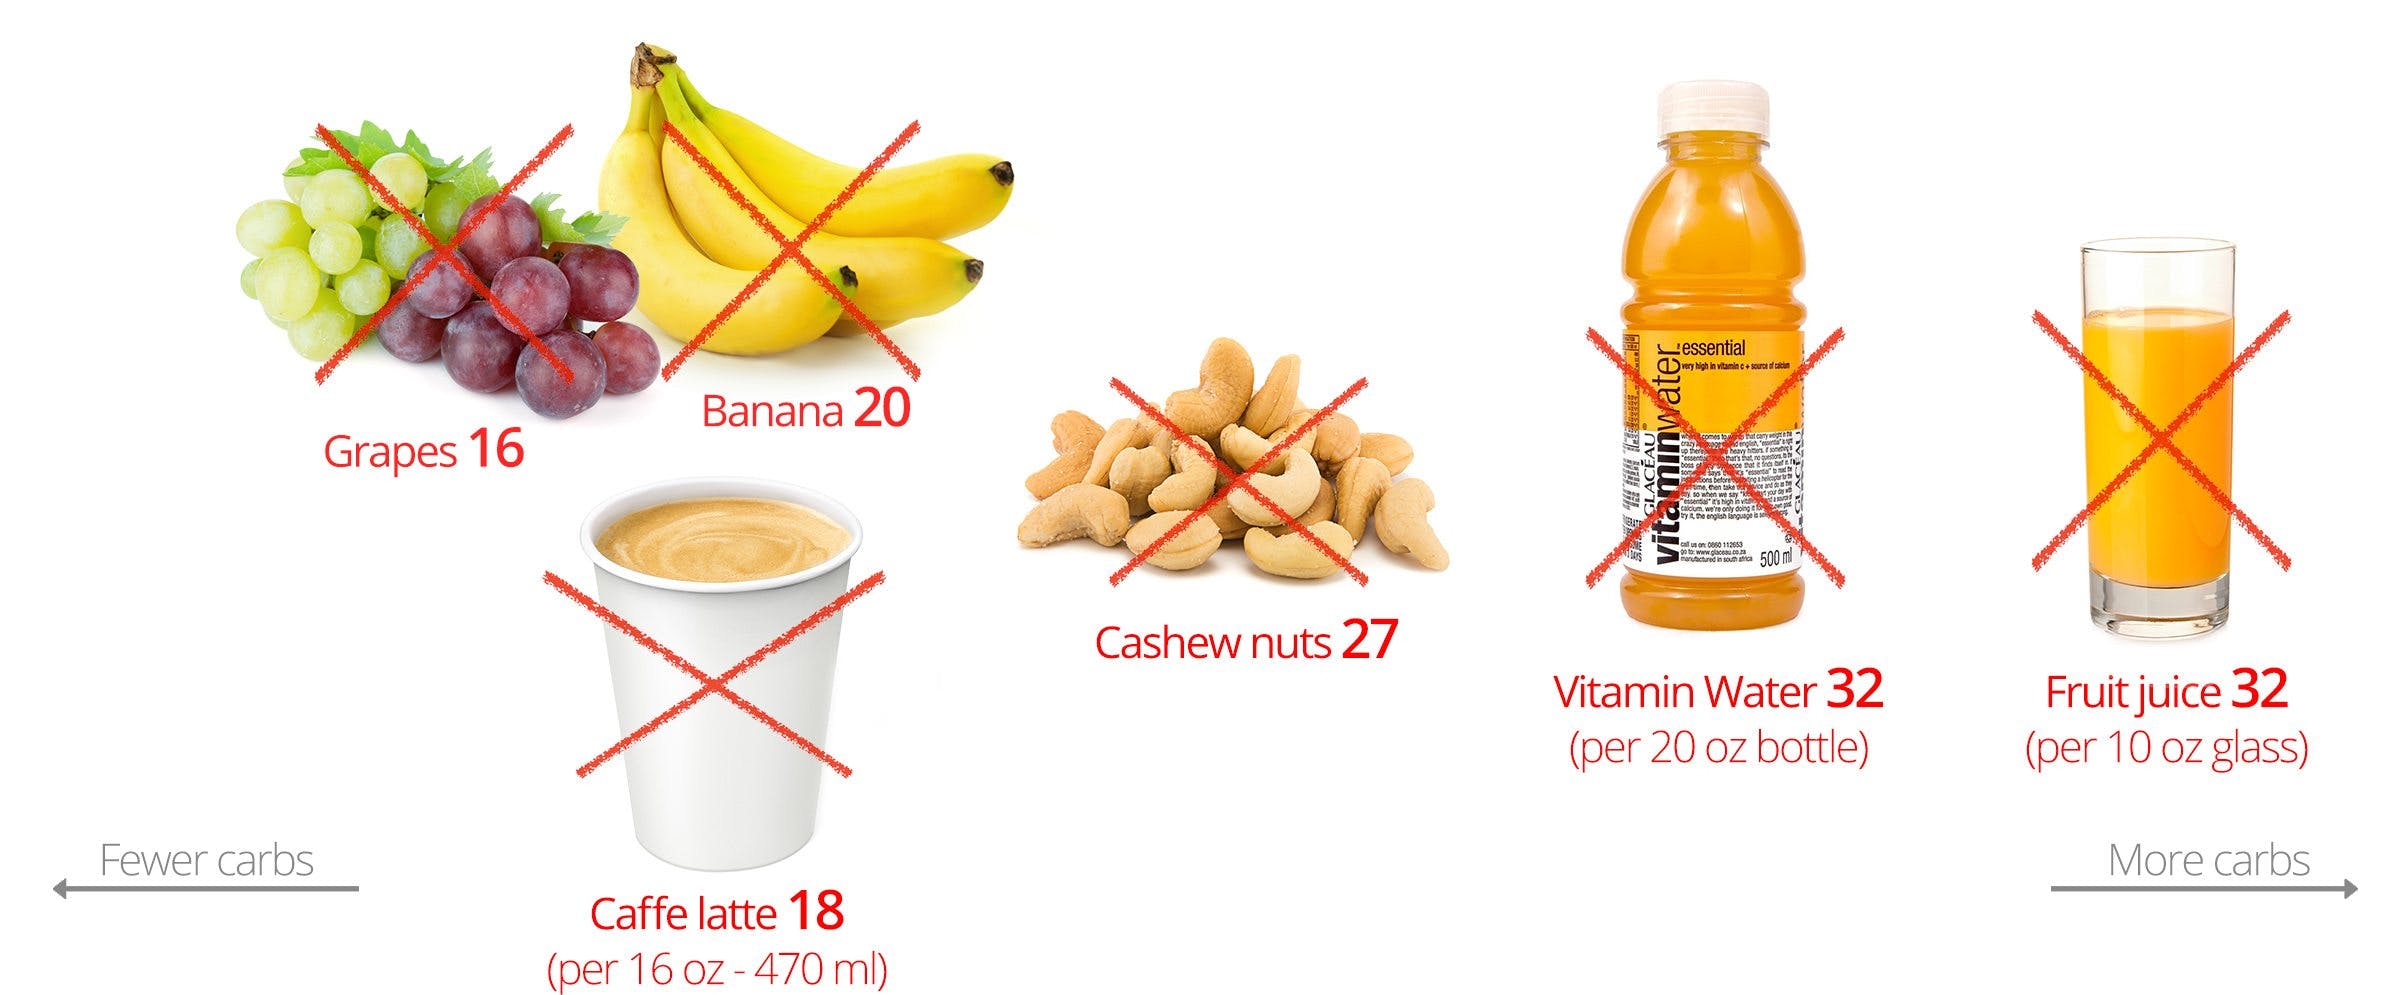 Low-carb snacks: Common mistakes